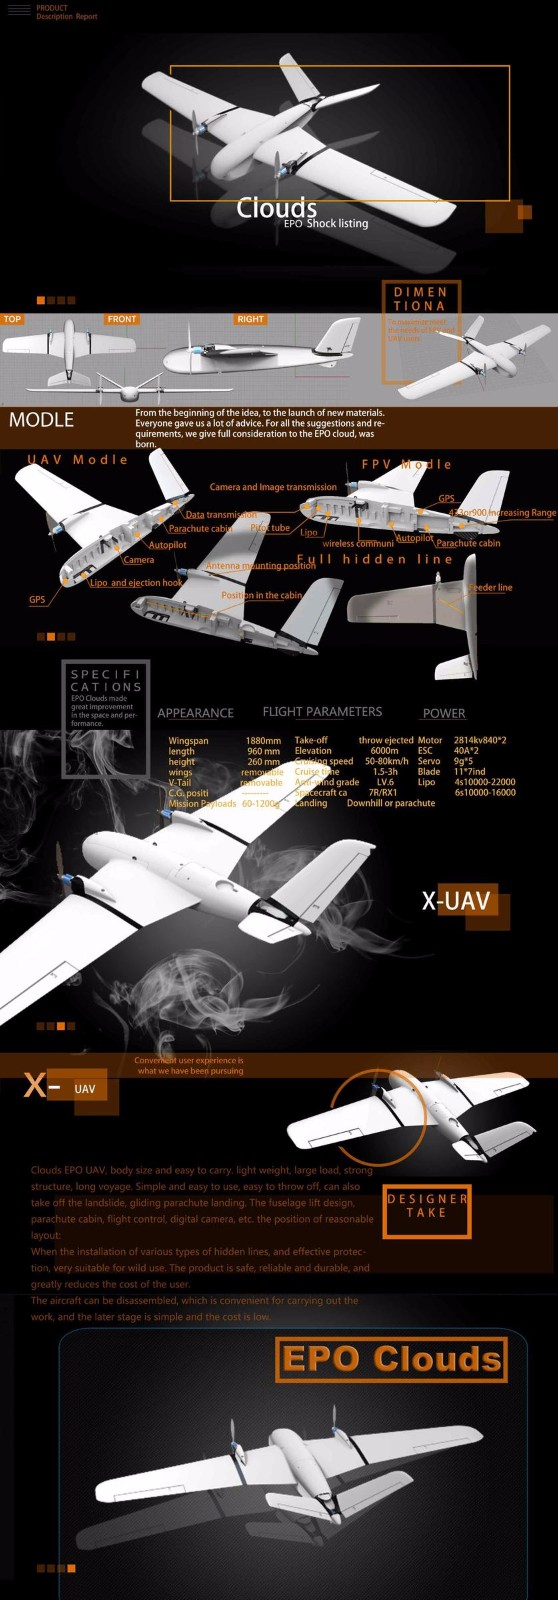 X-UAV-Clouds-1880mm-Wingspan-Twin-Motor-EPO-FPV-Aircraft-RC-Airplane-KIT-Aerial-Mapping-Version-1101156-1